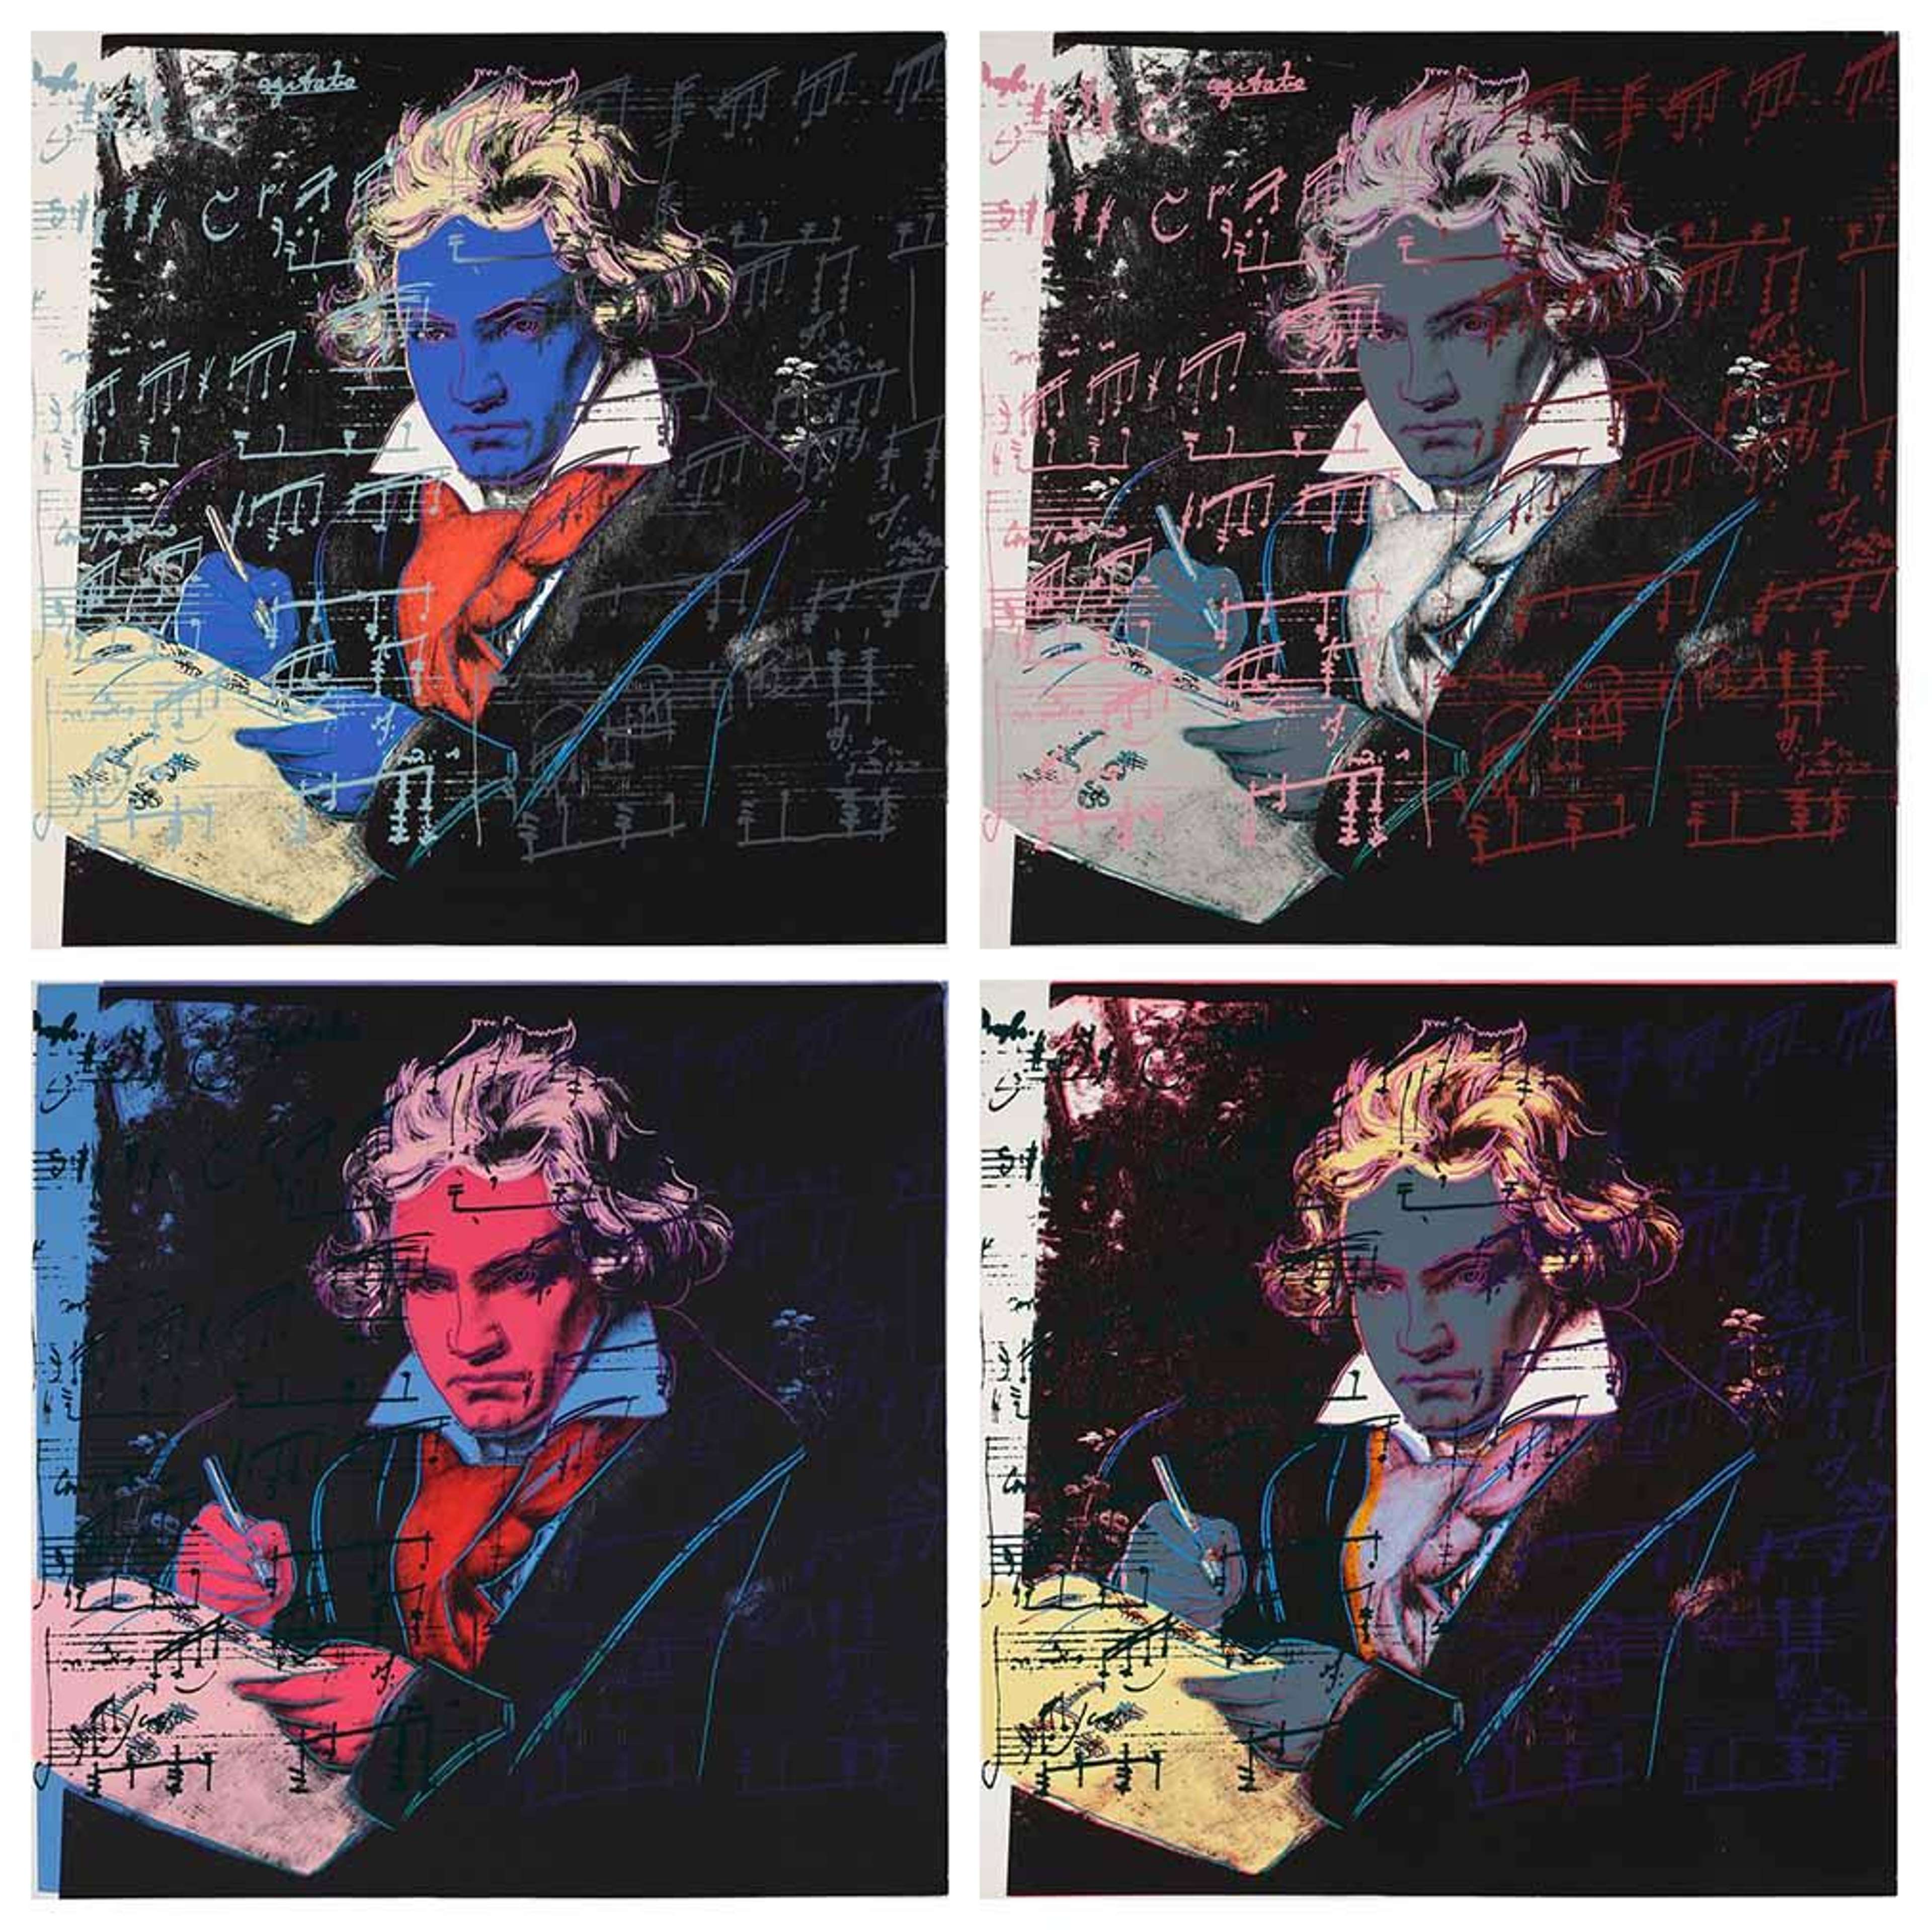 10 Facts About Andy Warhol's Beethoven